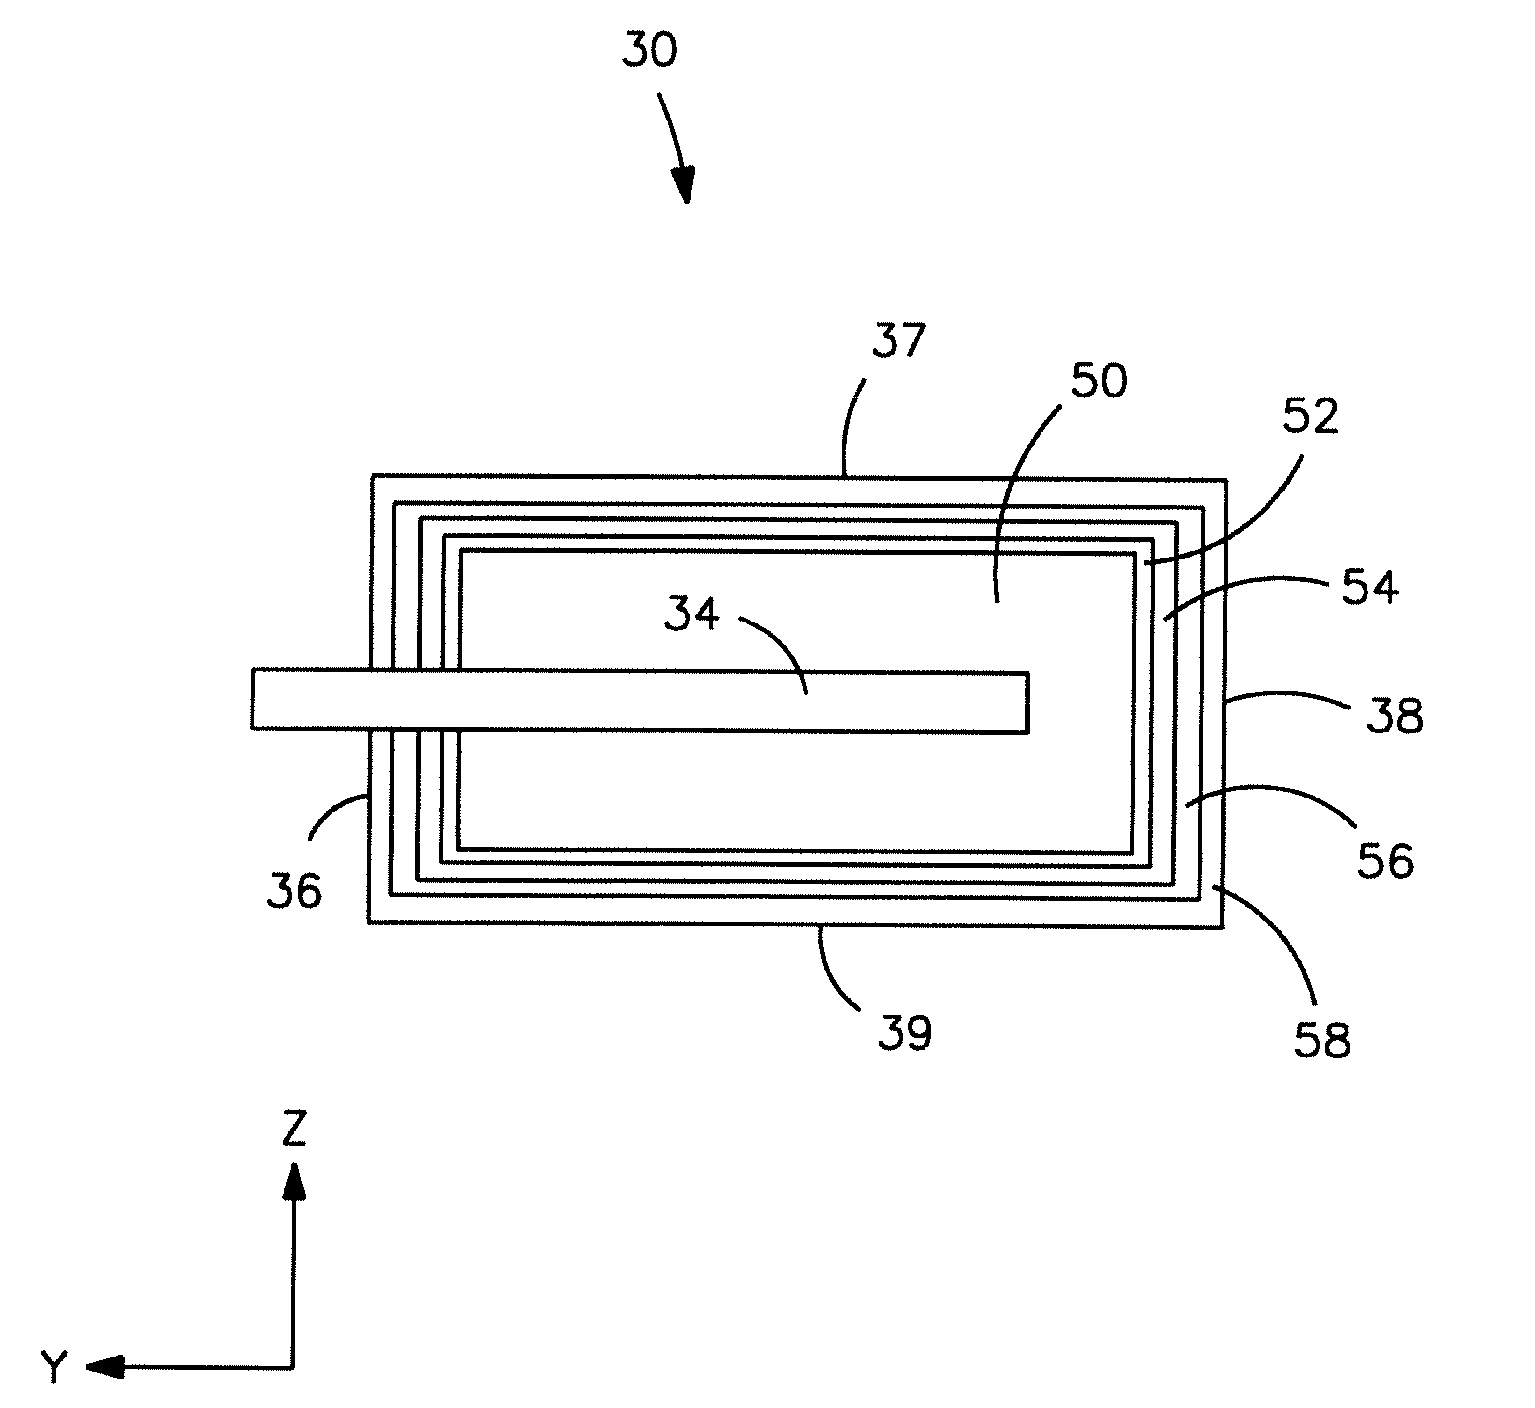 Electrolytic capacitor anode treated with an organometallic compound